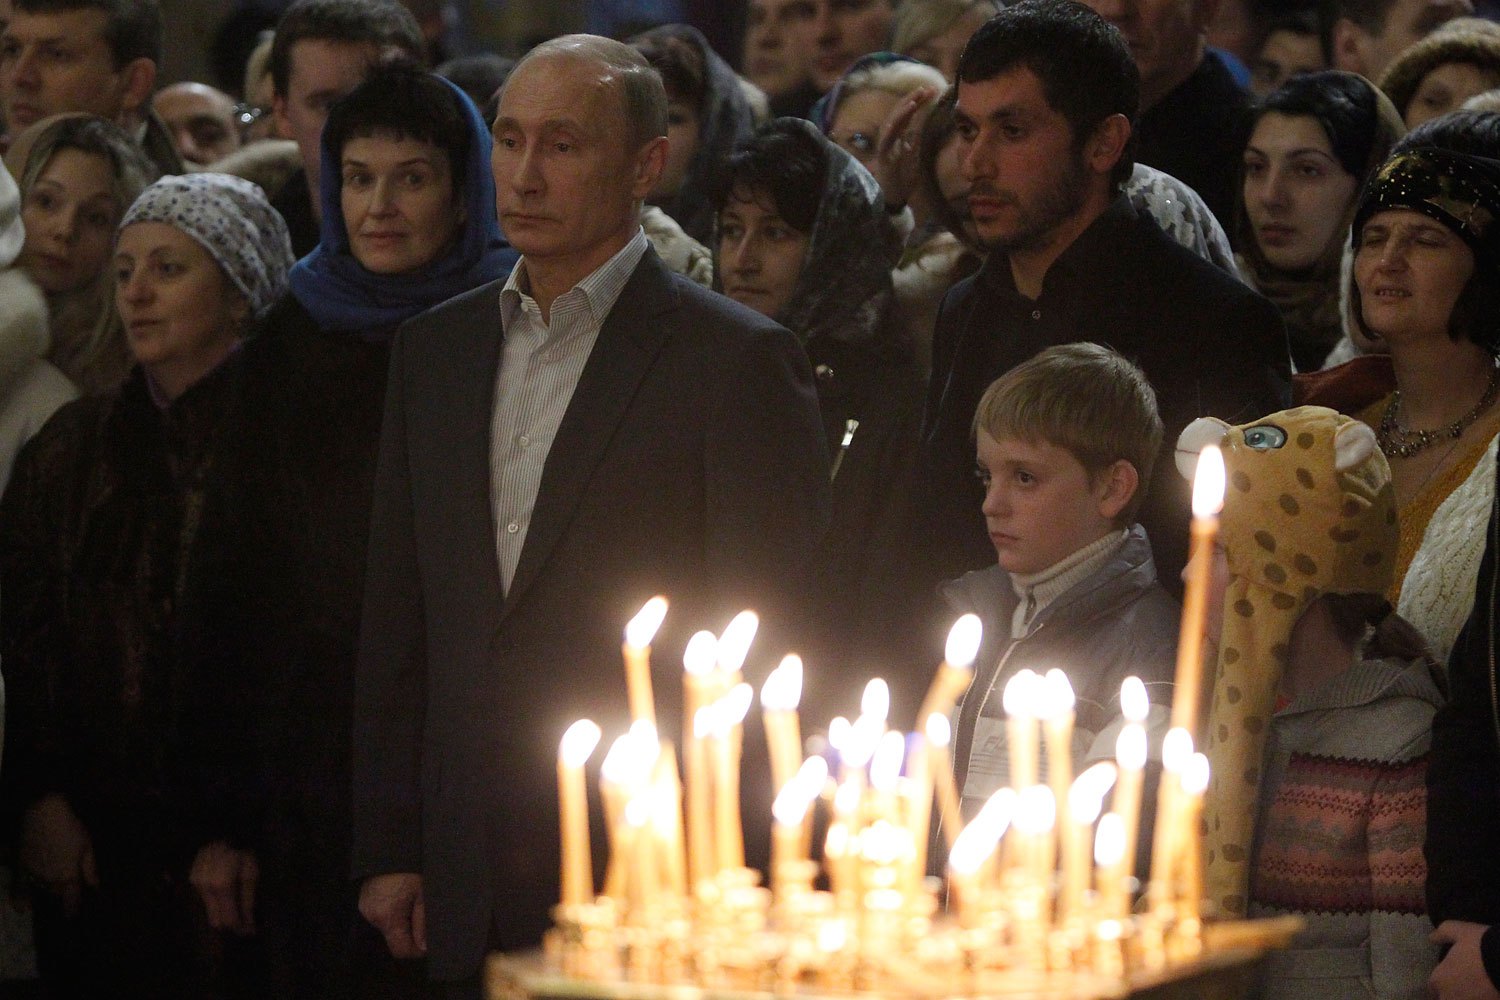 Russia's President Vladimir Putin attends the Orthodox Christmas service at the Cathedral of the Holy Face of Christ the Savior in the Russian city of Sochi on Jan. 7, 2014. (Maxim Shemetov—Reuters)